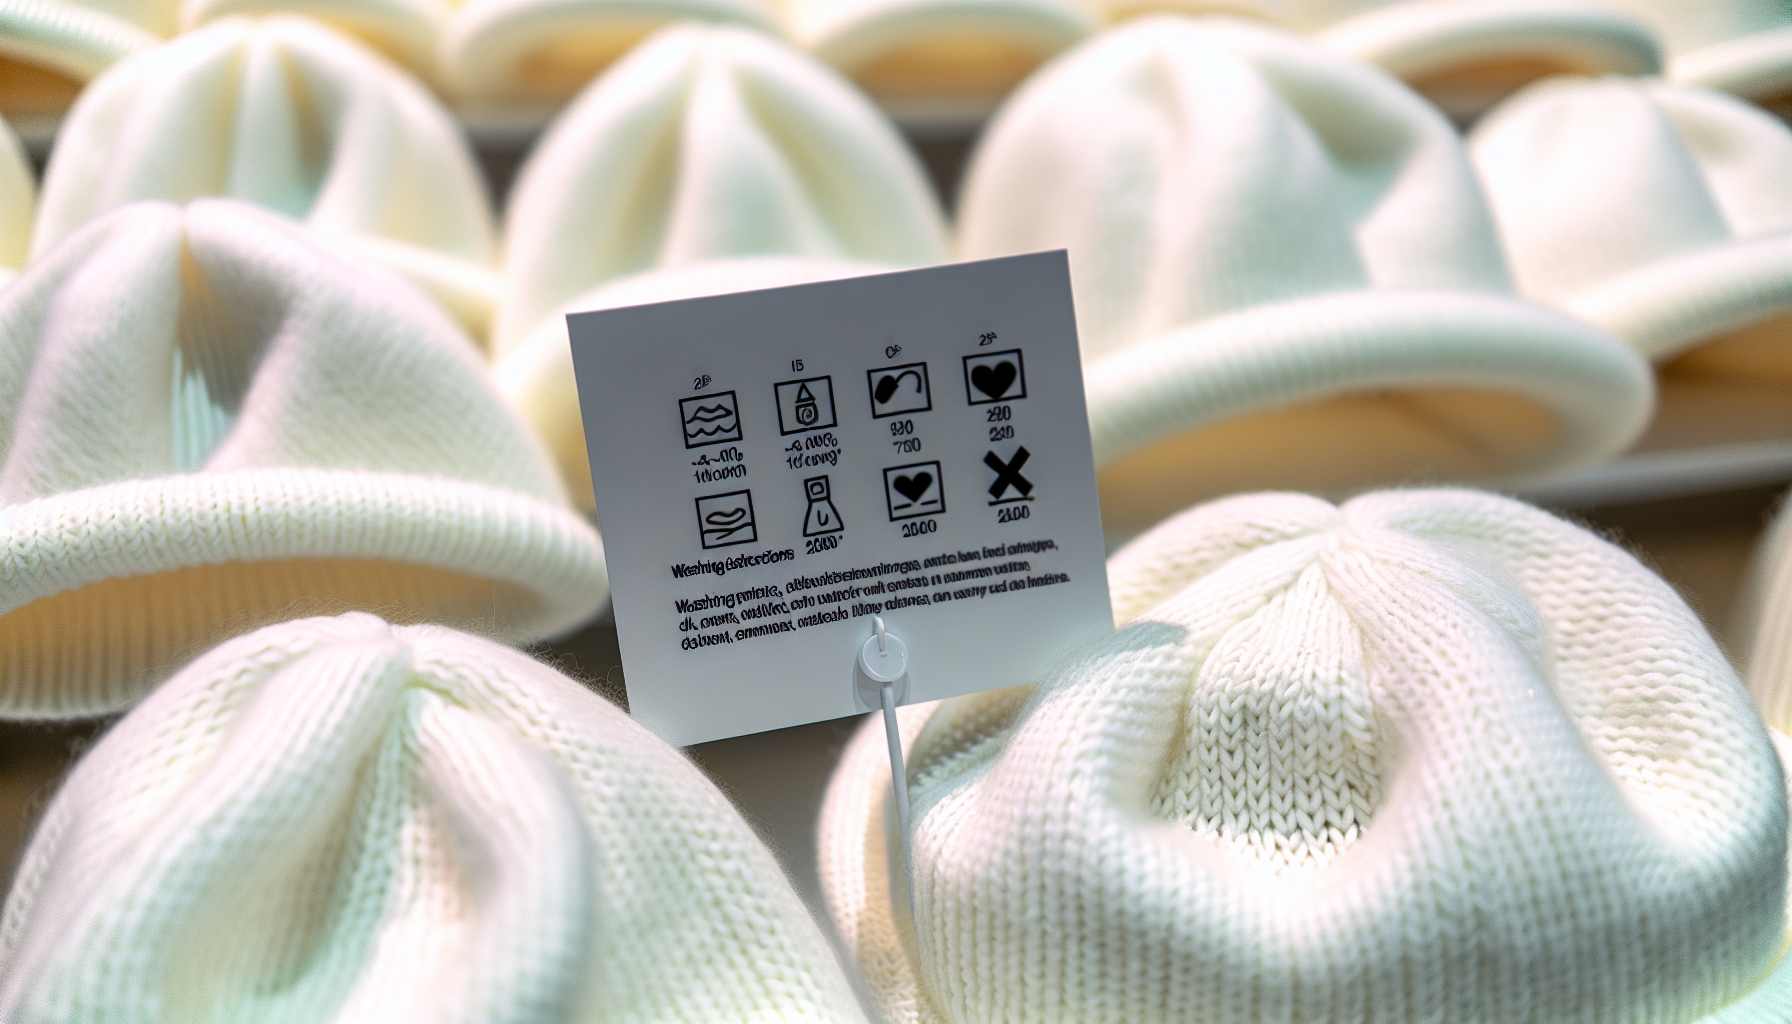 Variety of white hats made from different materials